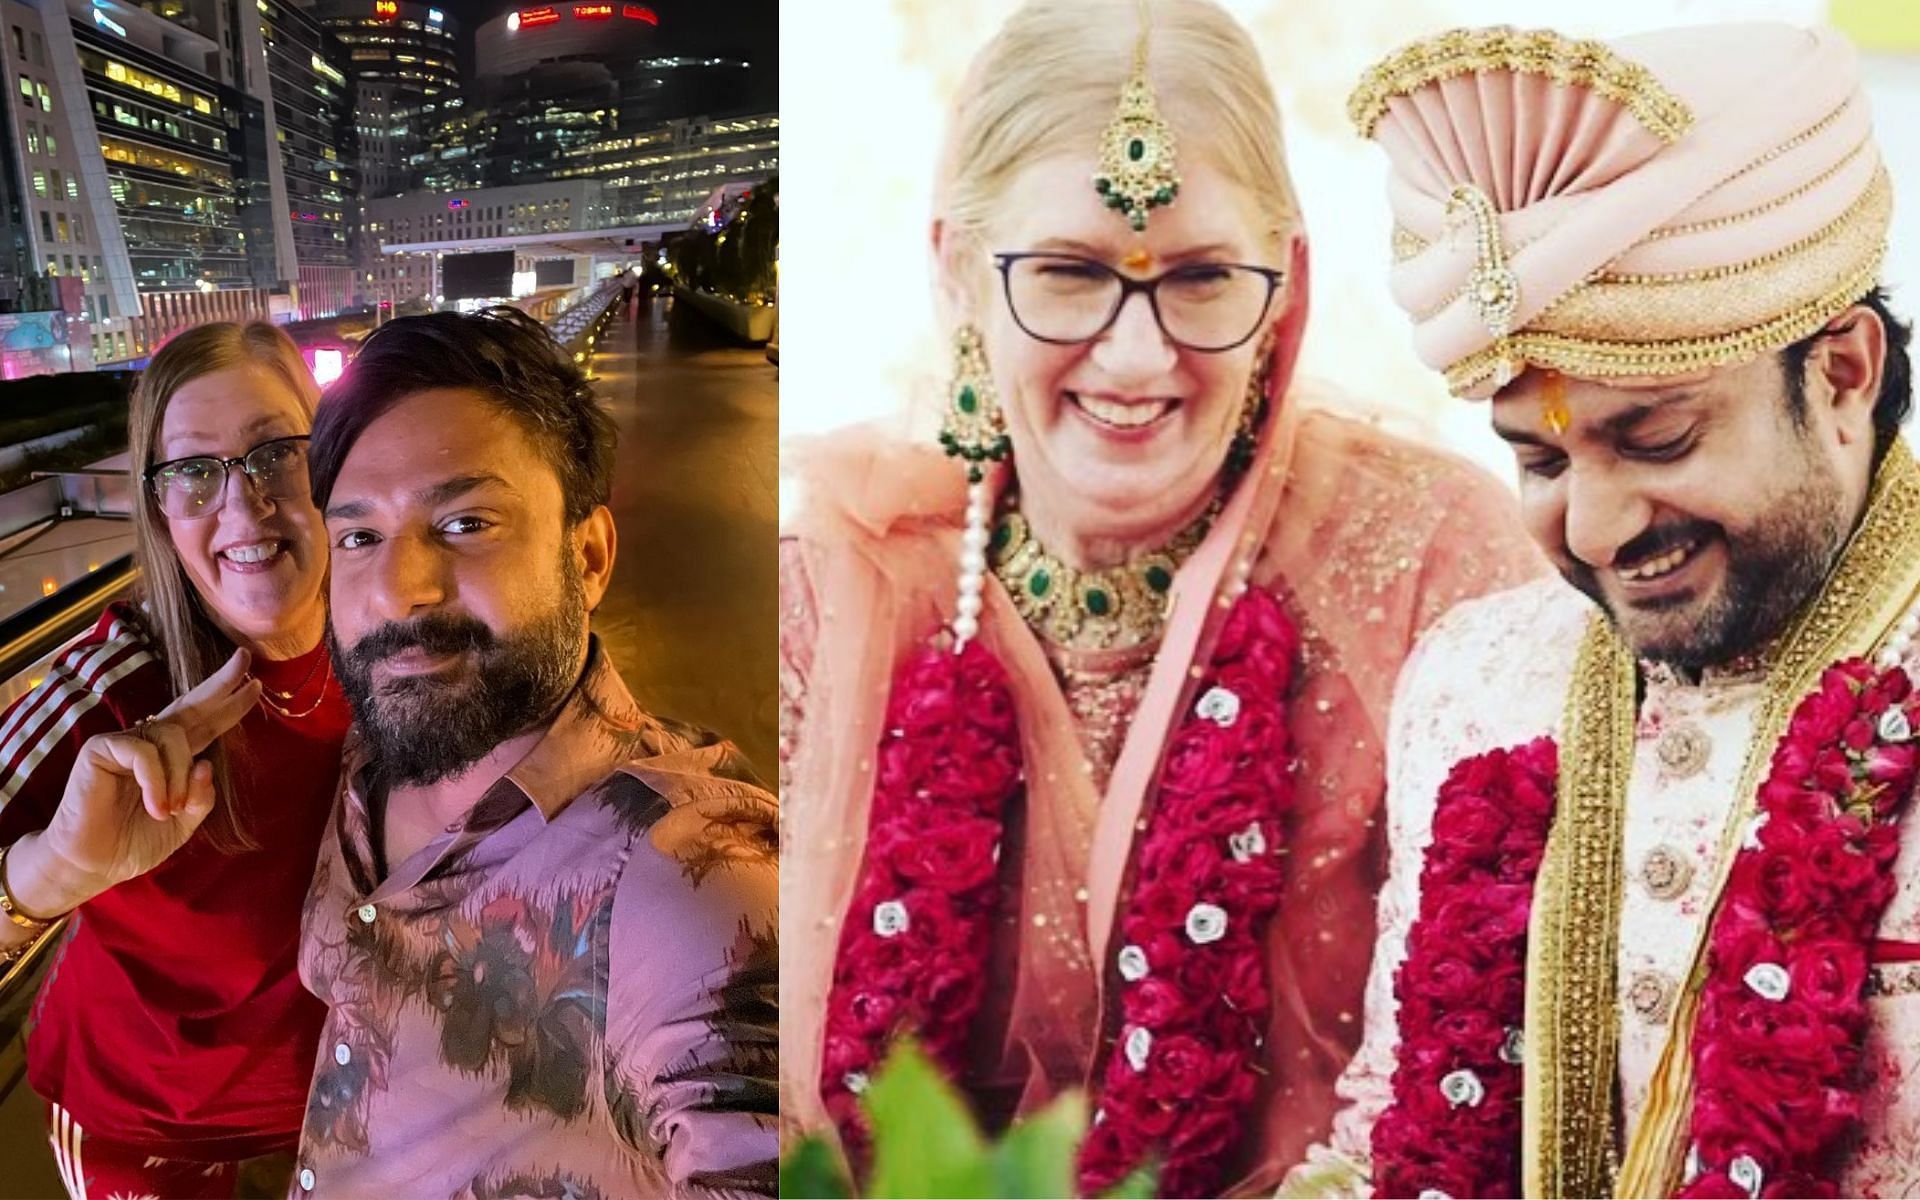 Jenny wants to take Sumit to America (Images via sumitjenny/ Instagram)